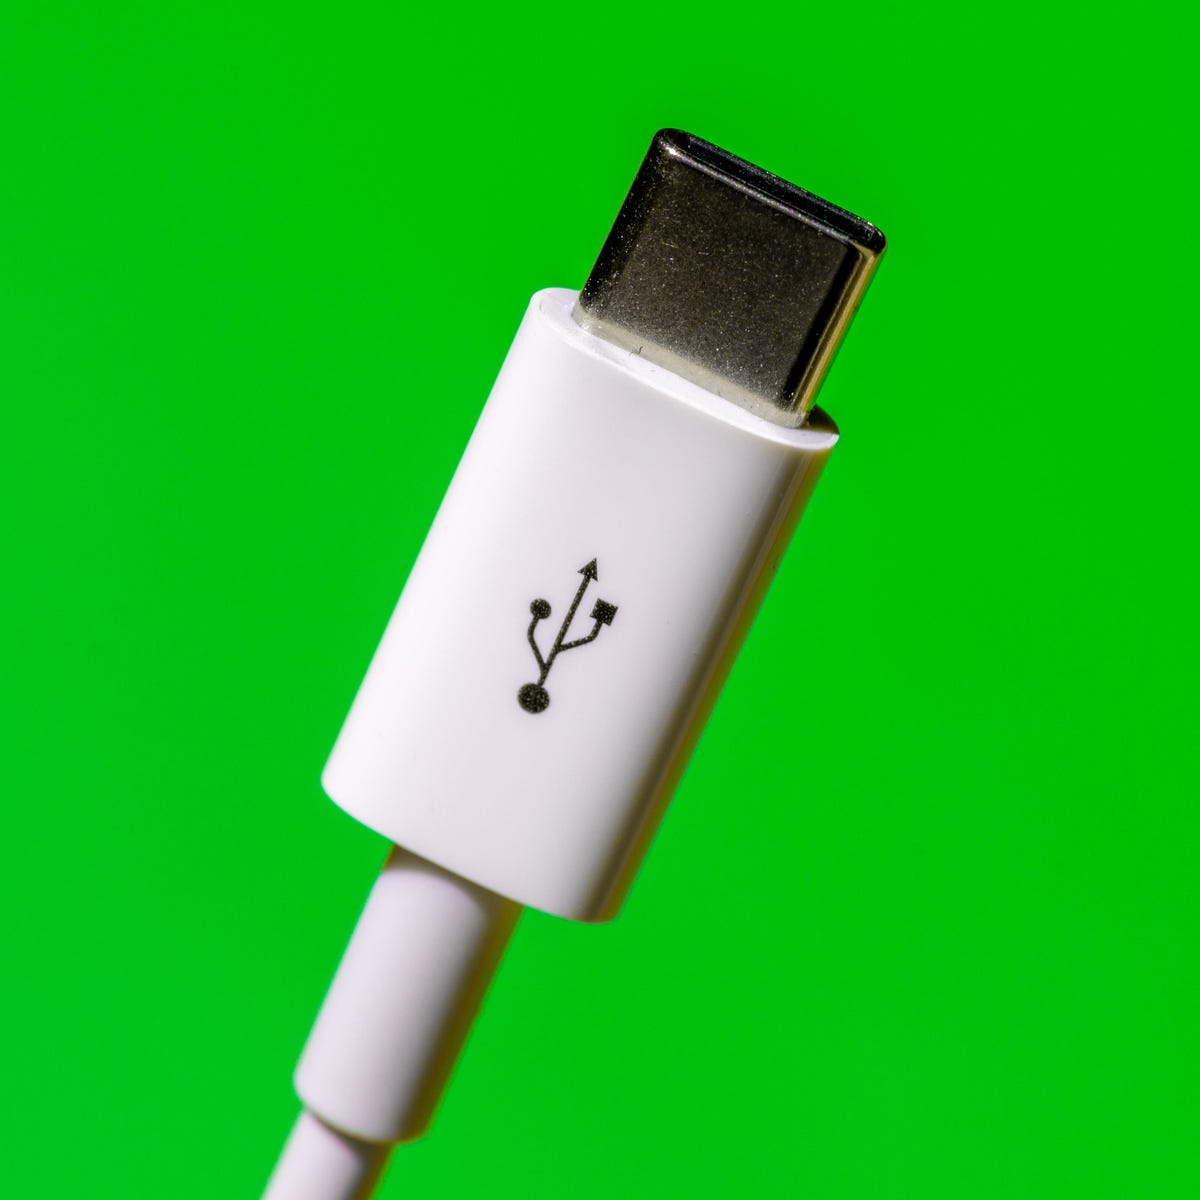 Finally, a USB-C iPhone Is Coming - CNET